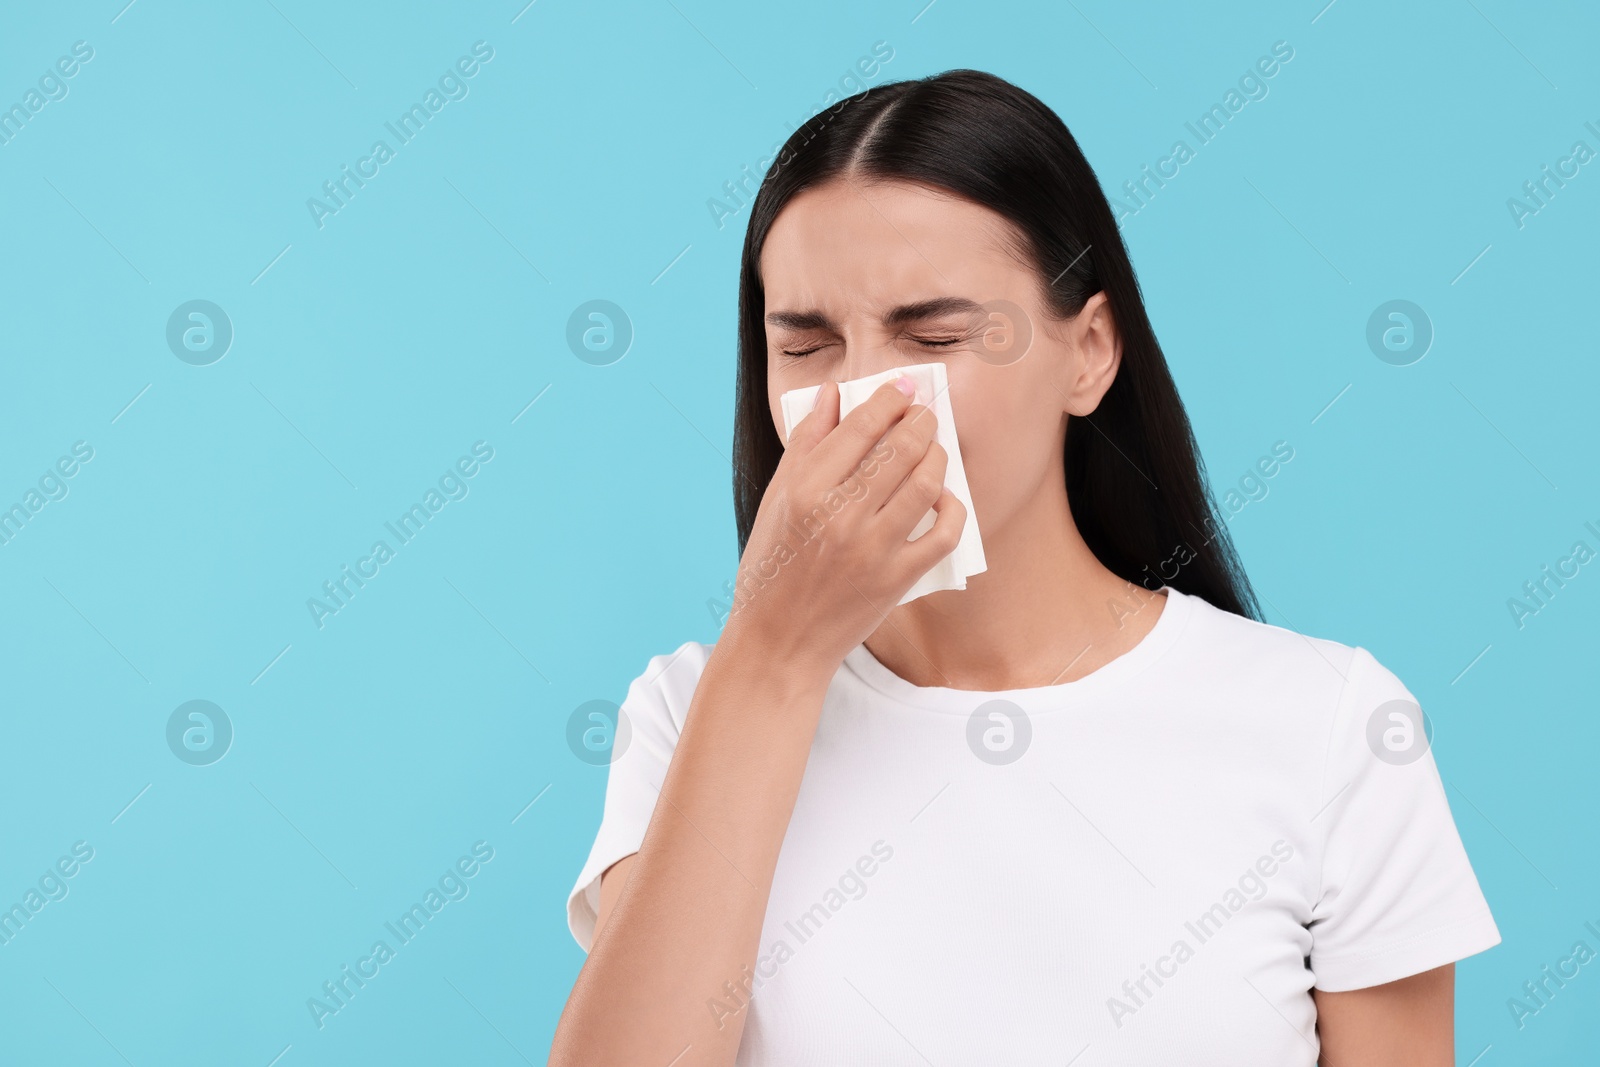 Photo of Suffering from allergy. Young woman blowing her nose in tissue on light blue background. Space for text